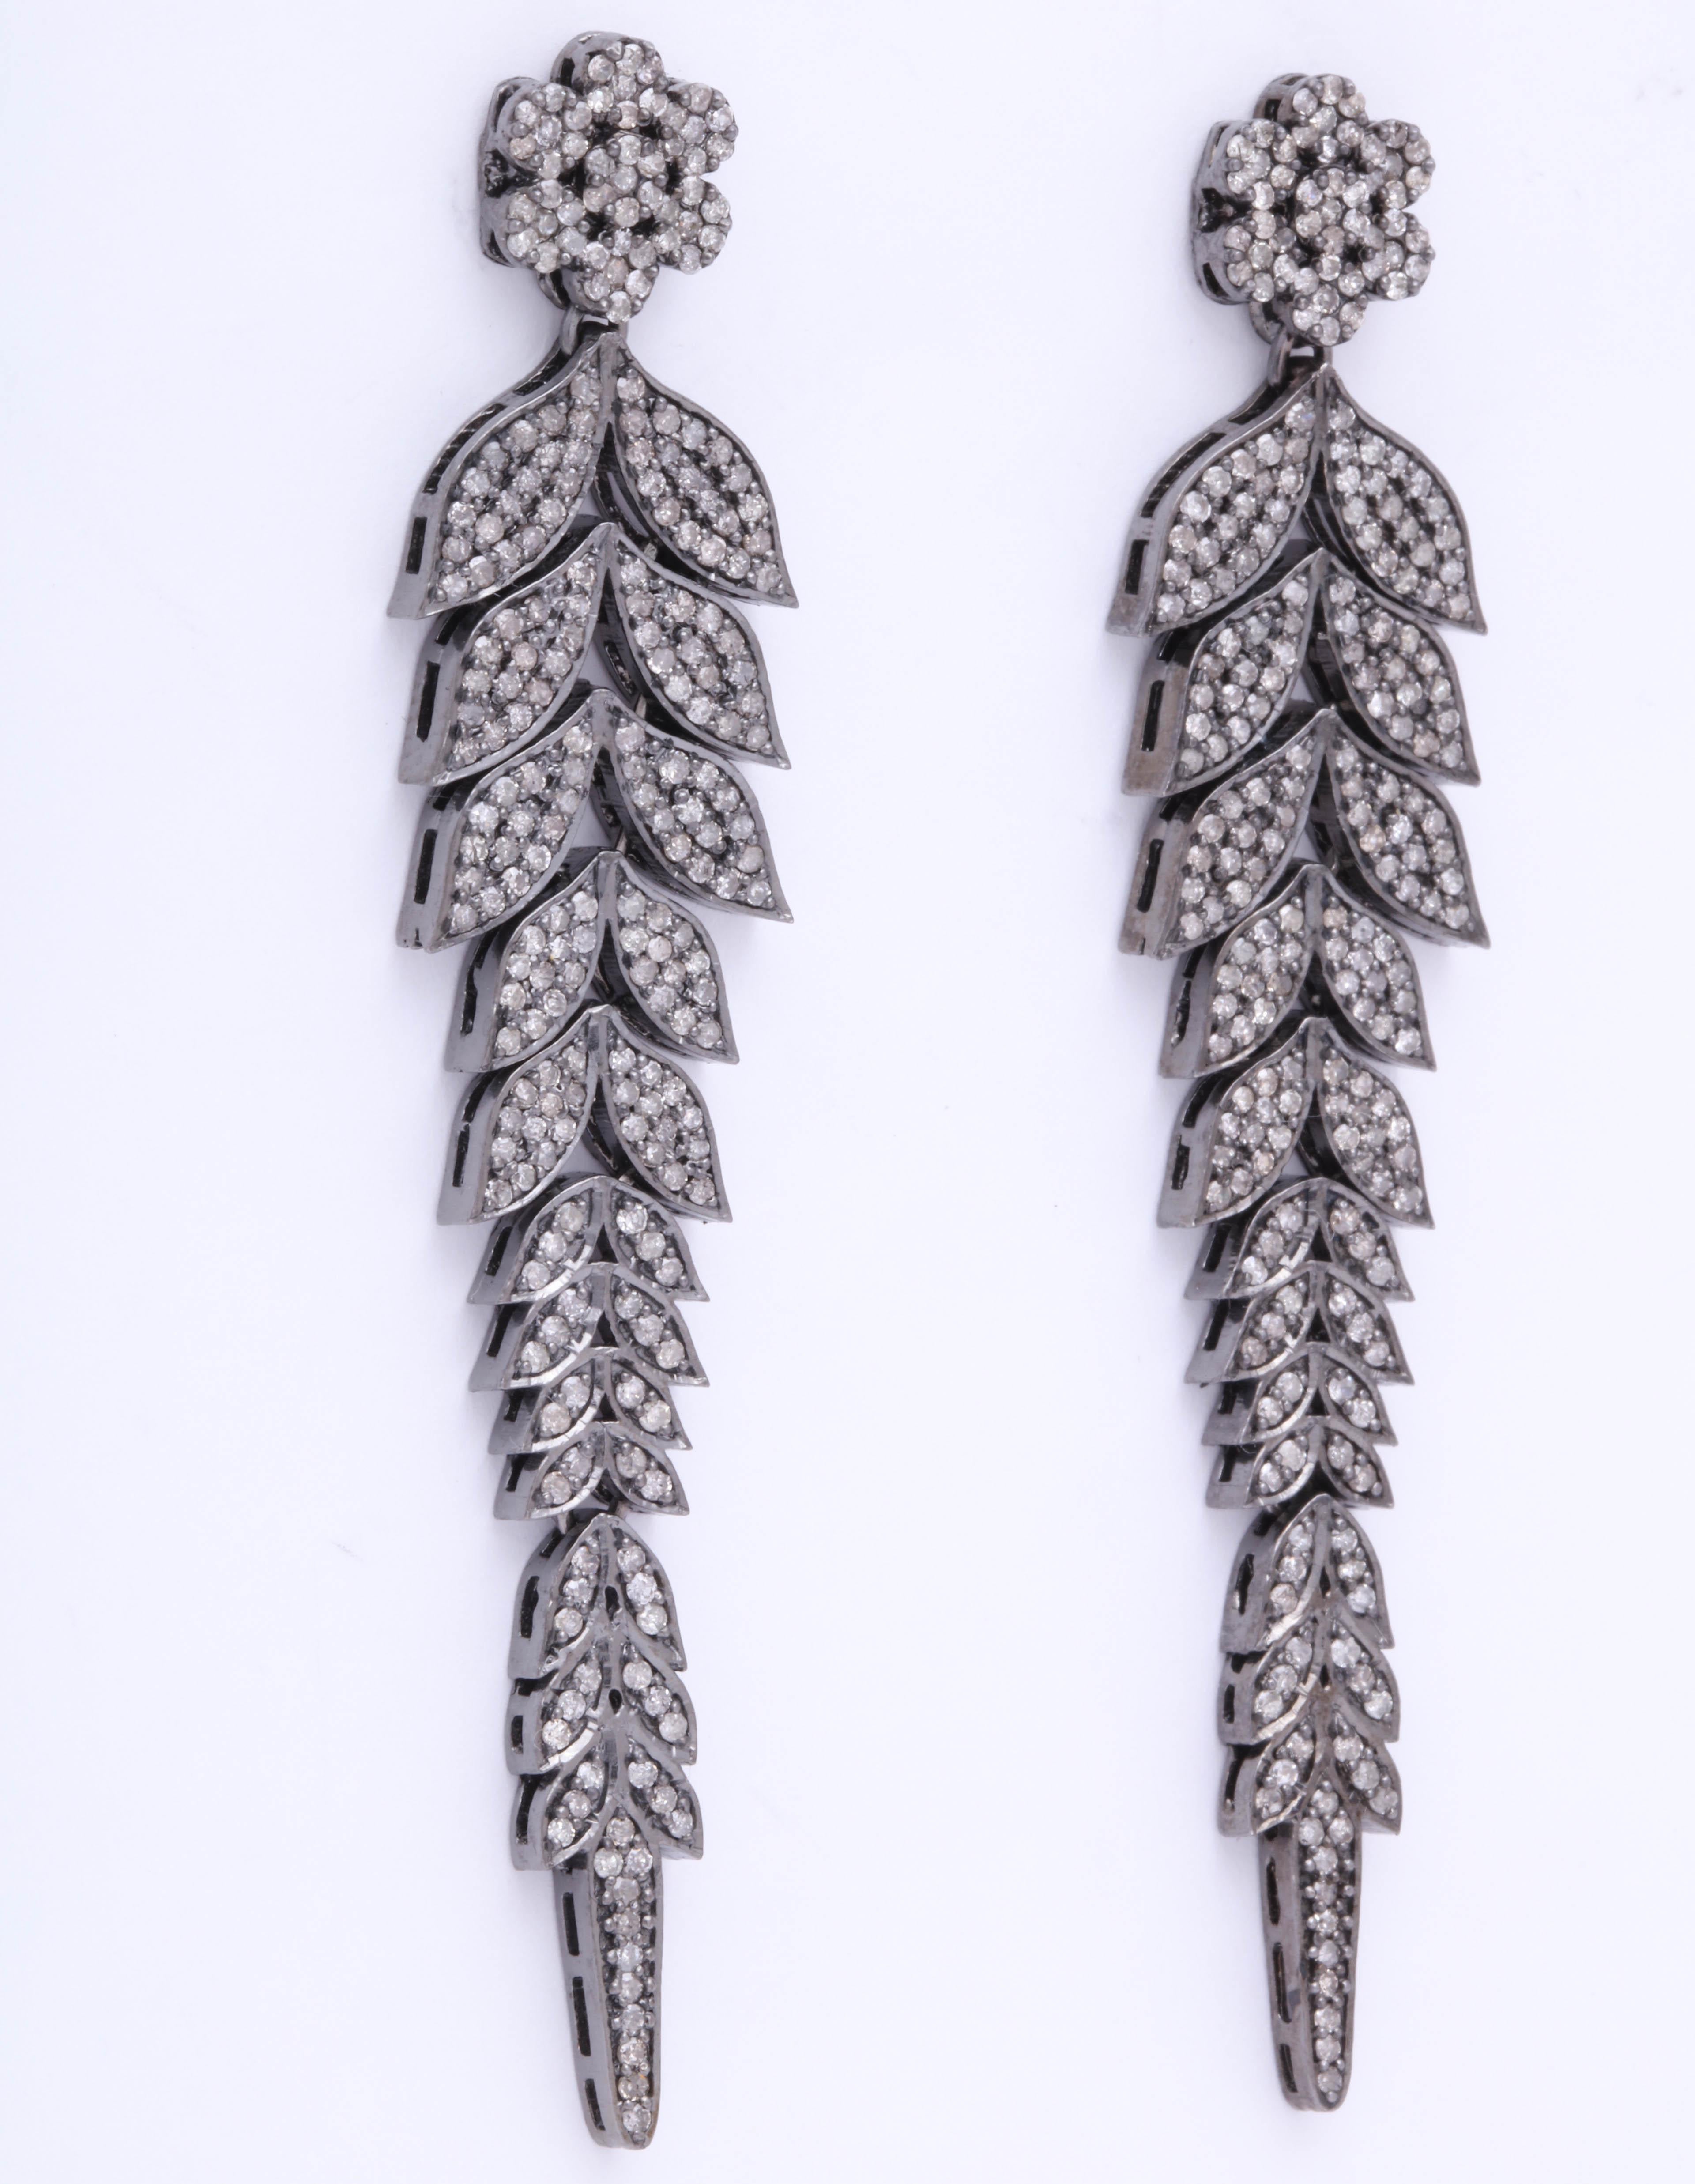 A pair of earrings composed of cascading rhodium plated sterling silver leaves set with diamonds.
The vines are suspended from rhodium plated sterling silver and diamond flower studs.
There are approximately 2.90 cts of diamonds.

Length: 3.00 inches